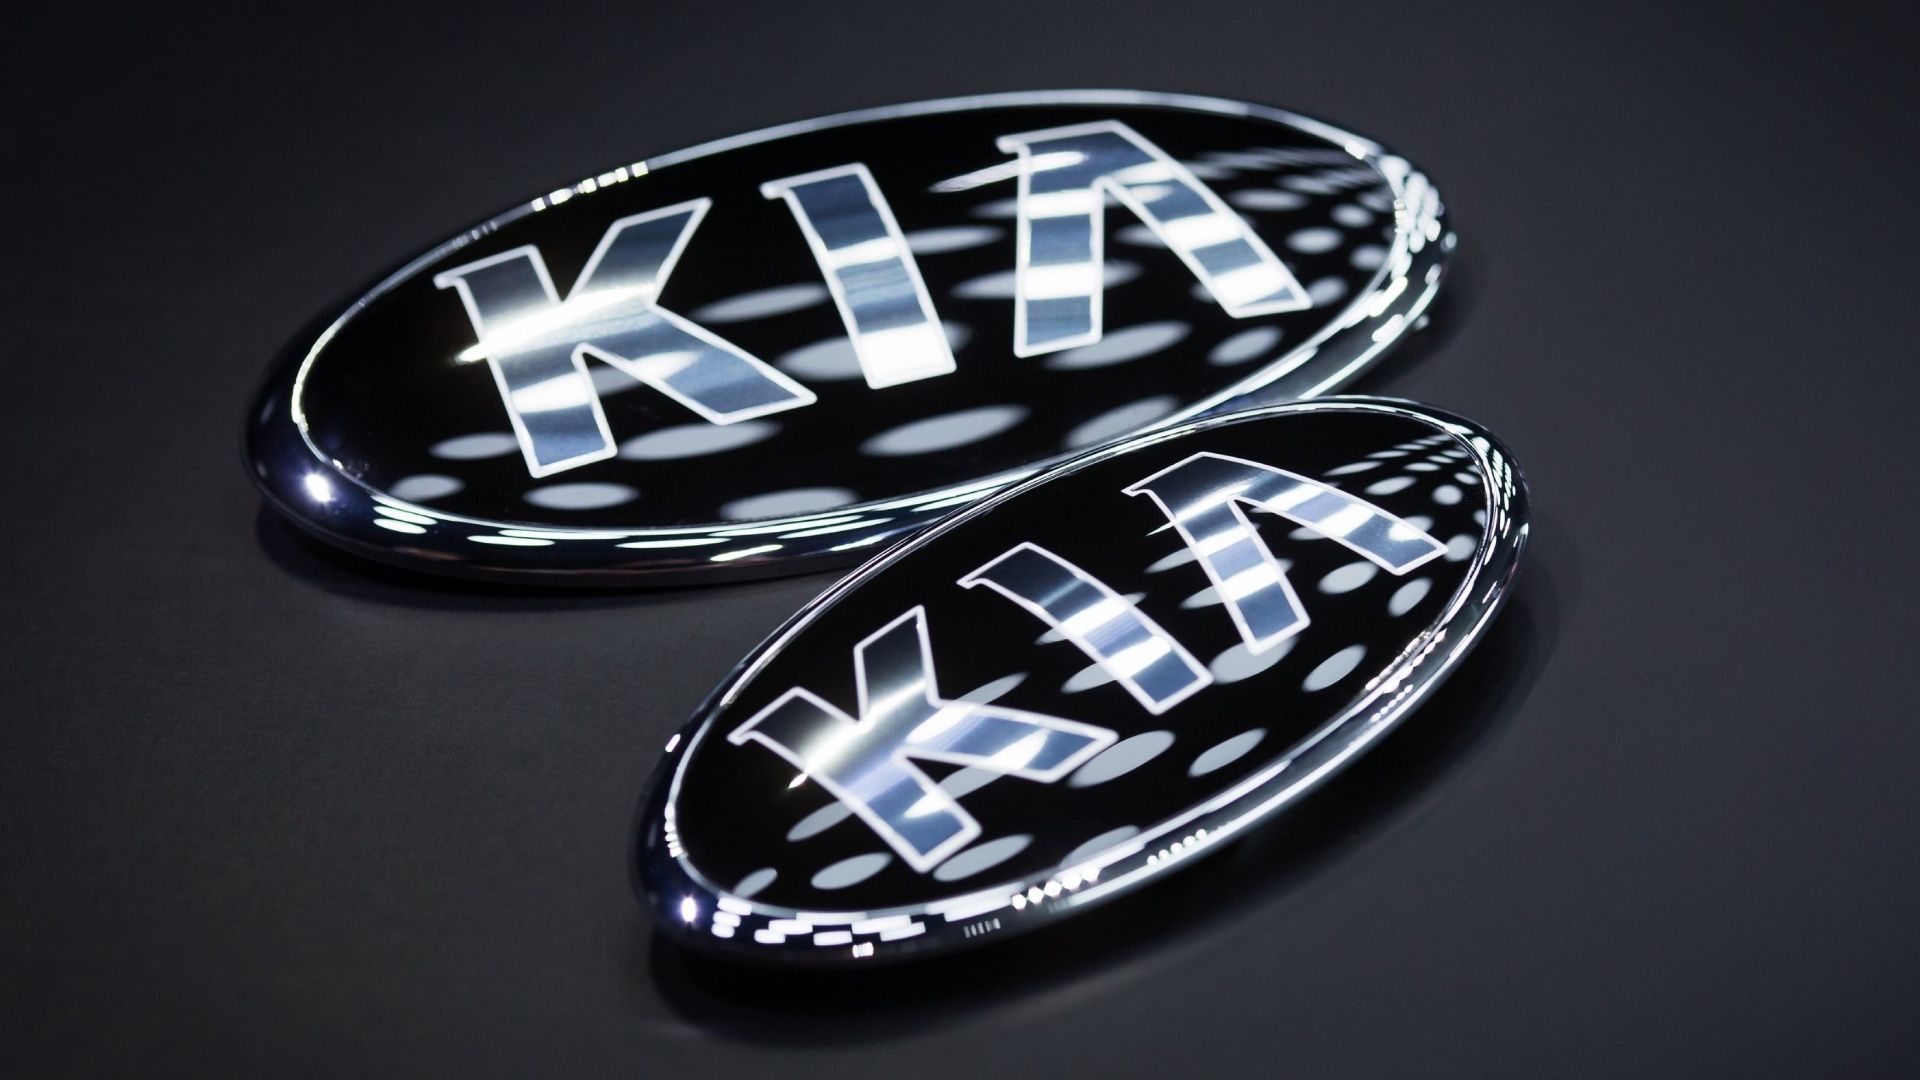 Kia plan S – electric cars and mobility solutions